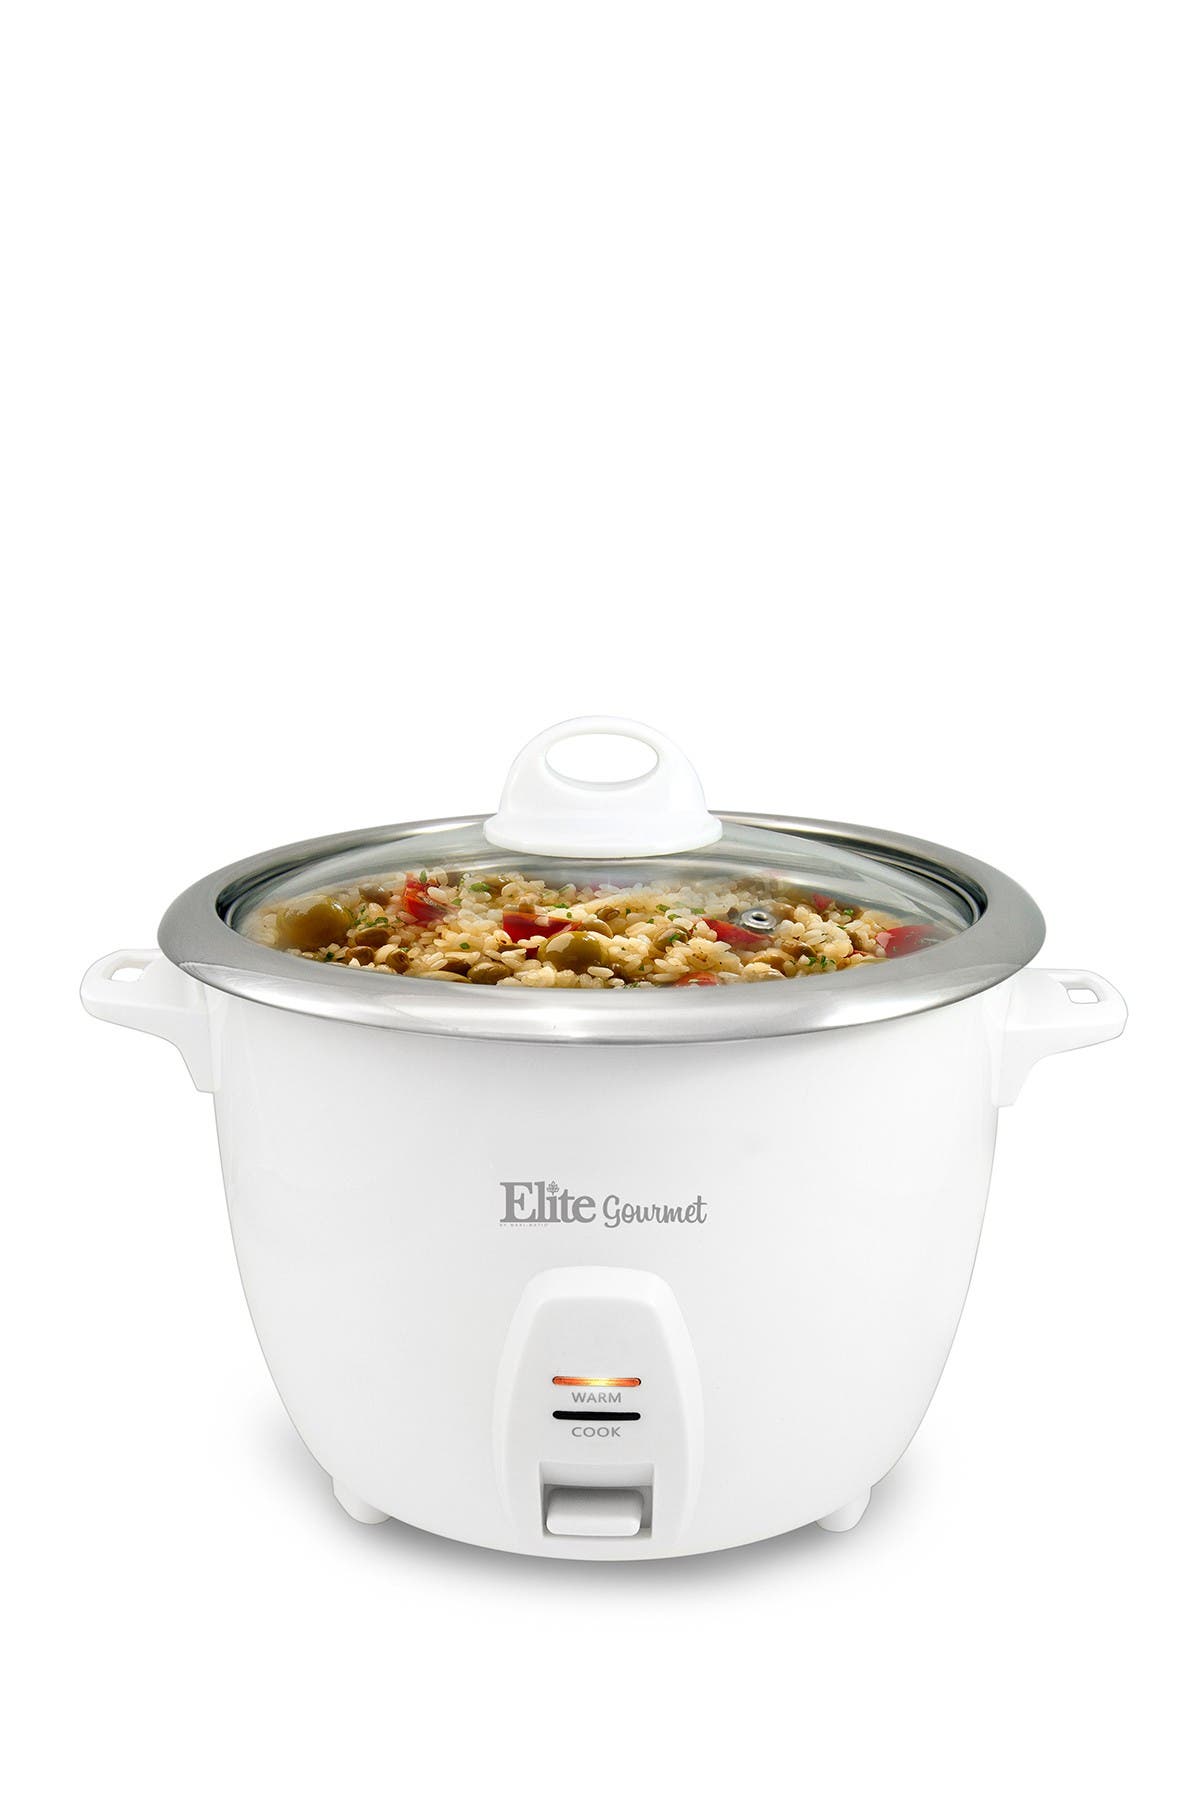 Maxi Matic Elite Gourmet 10 Cup Uncooked Rice Cooker With Stainless Steel Cooking Pot Nordstrom Rack